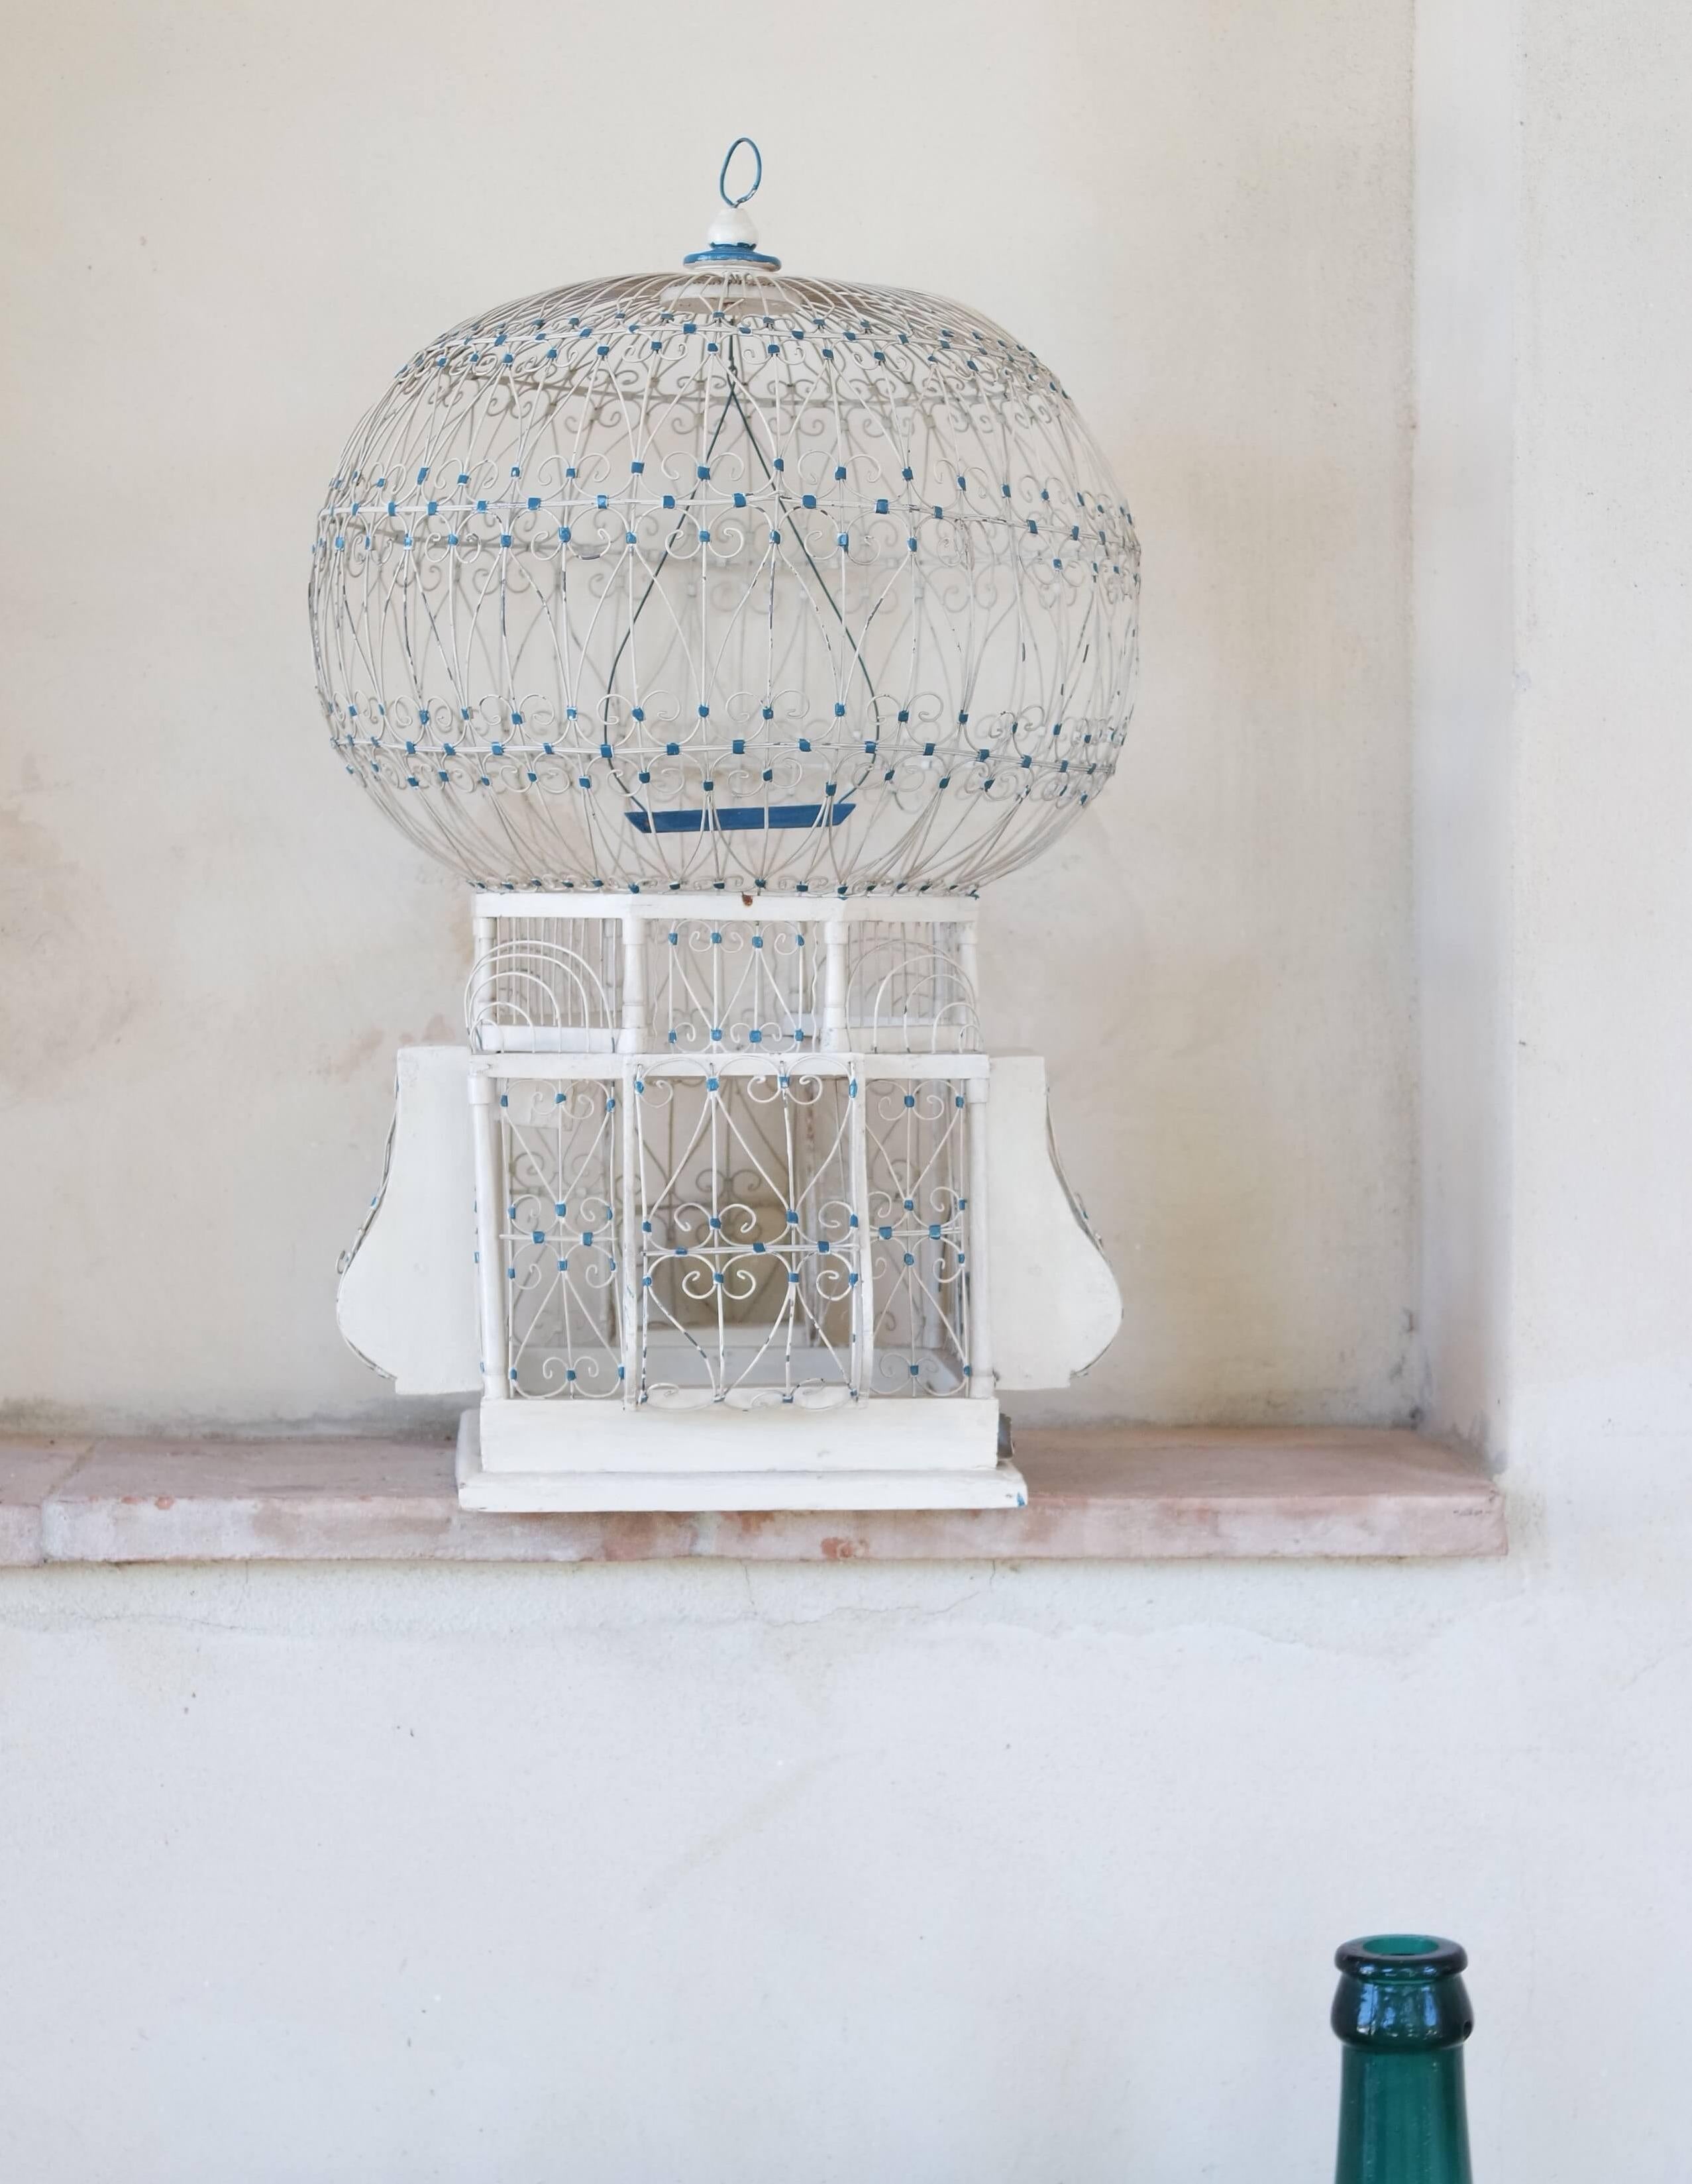 I have been on the lookout for the ideal vintage birdcage for some time and recently came across this wonderful specimen in Rome. It is made of wood and metal wire in cream and blue. It was made in the early 1900s and has an Asian design influence,